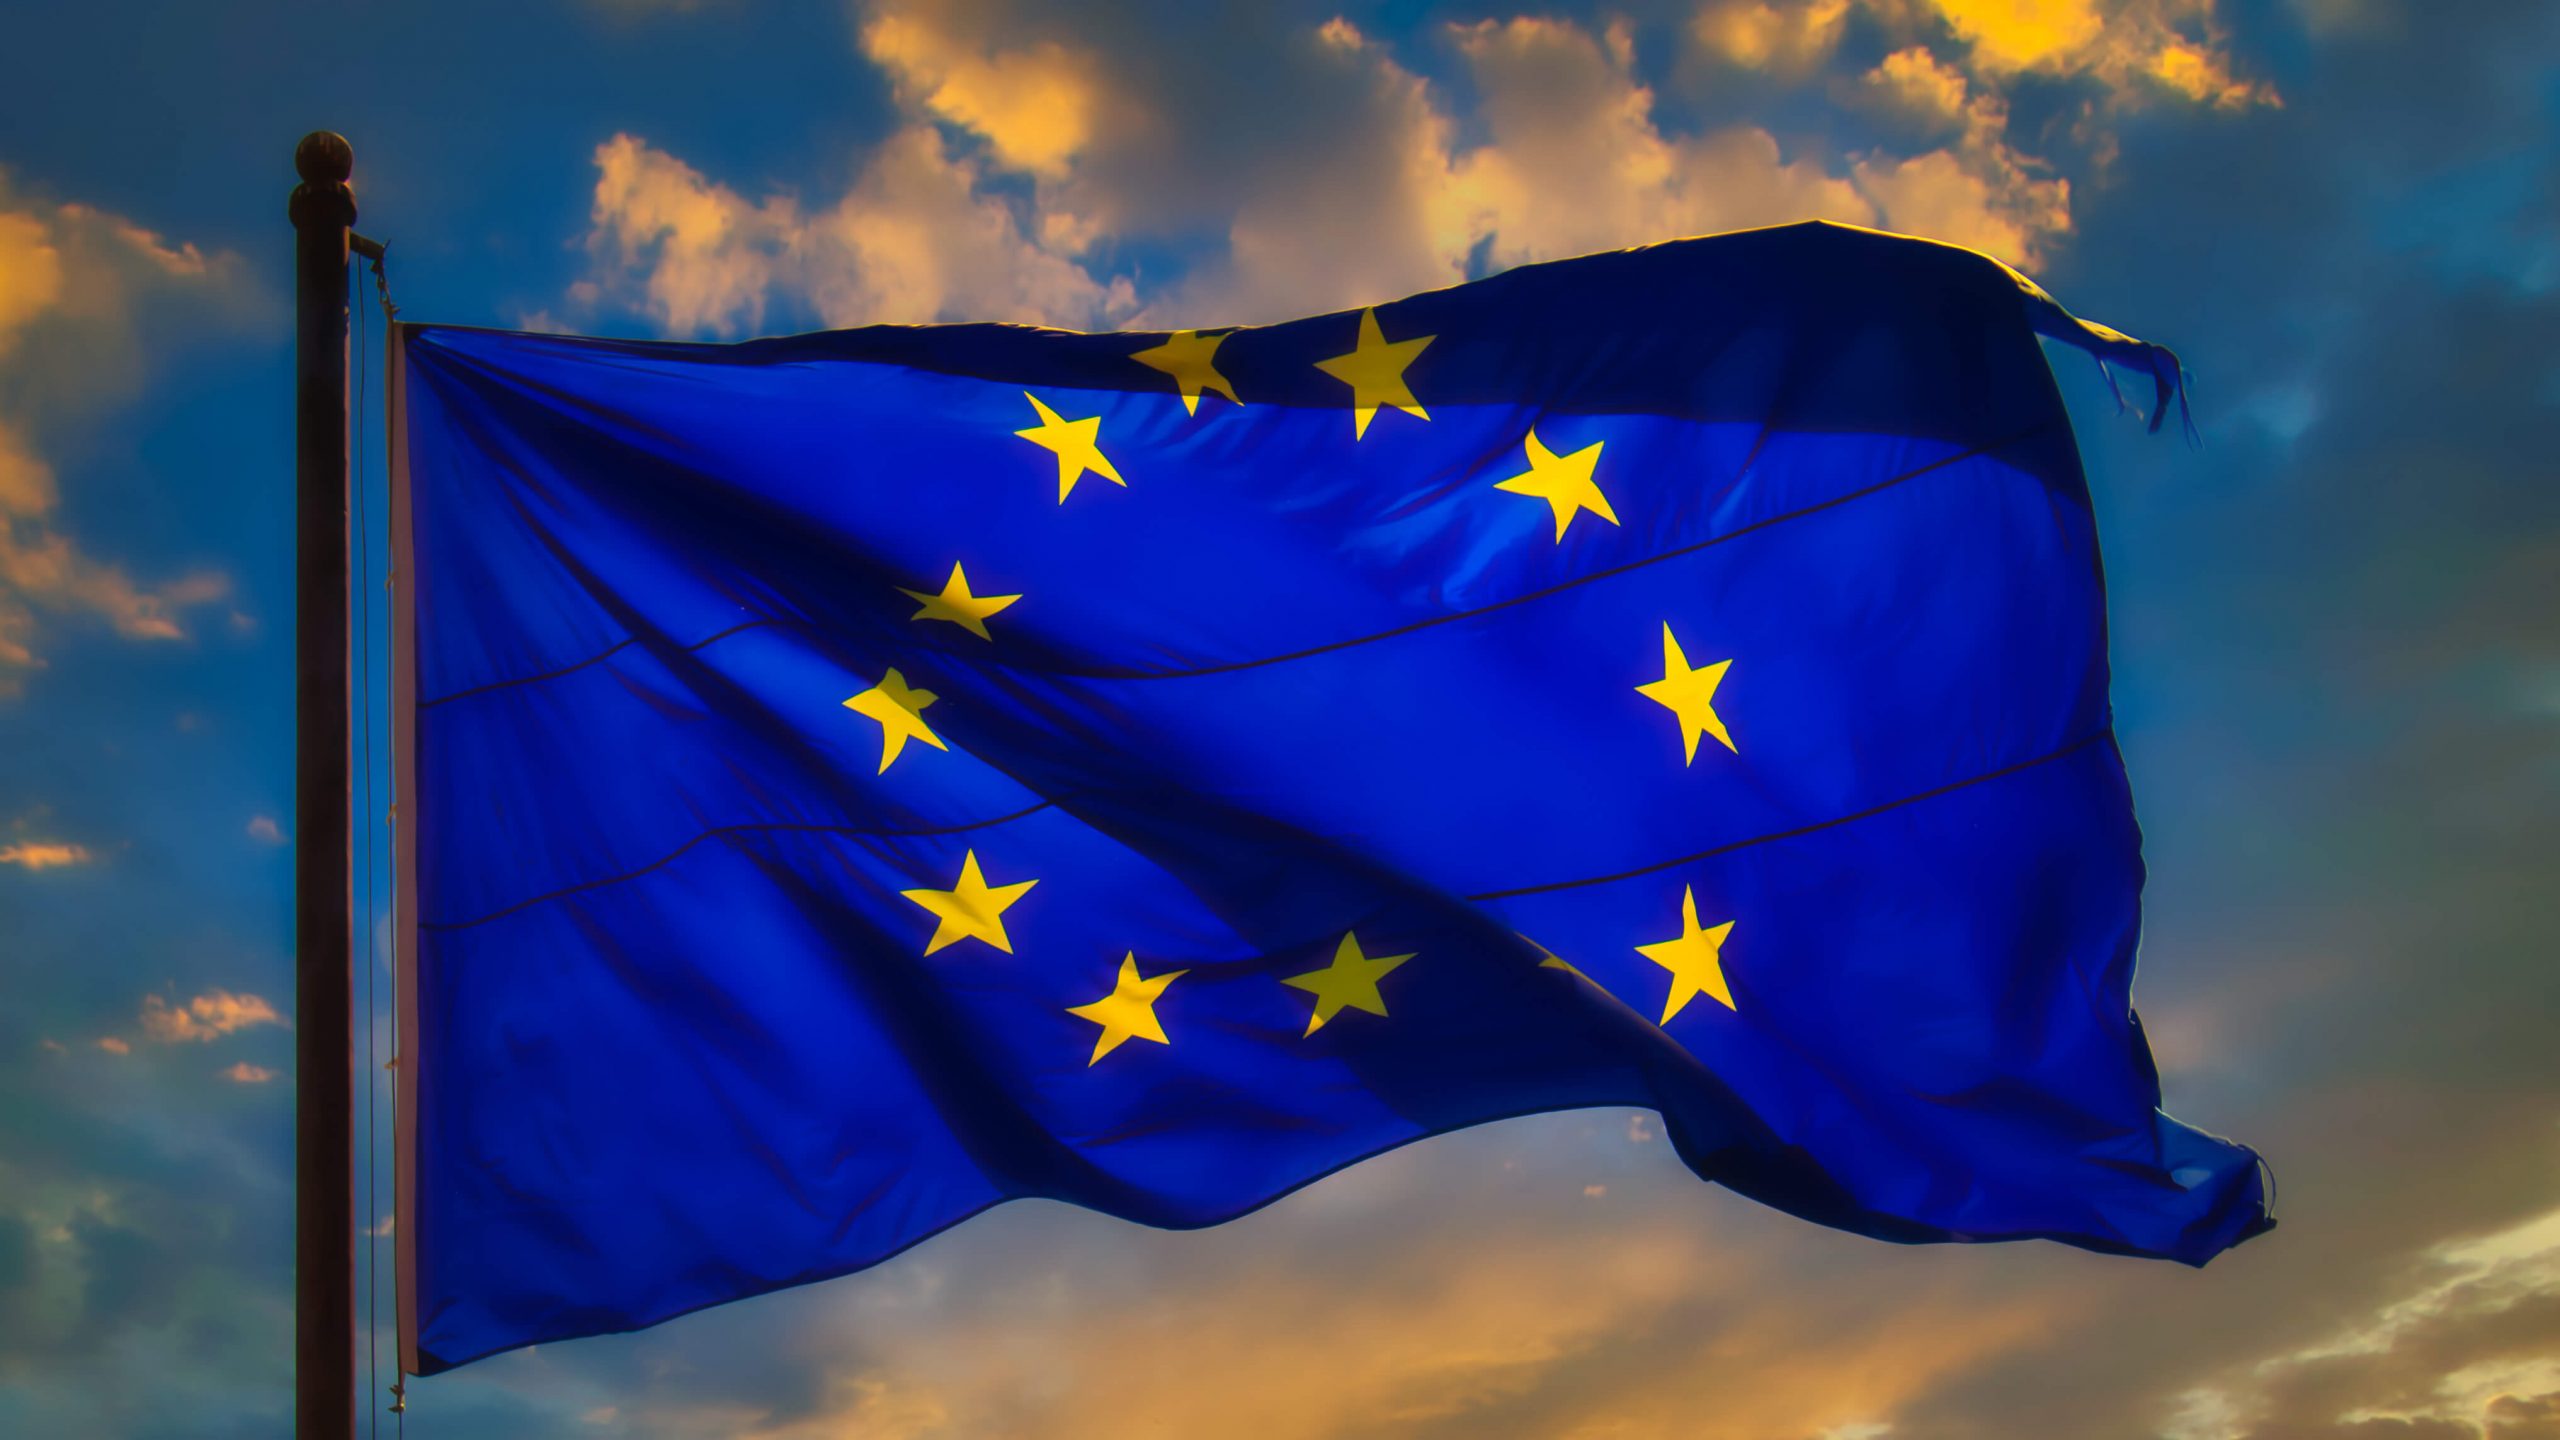 What to Know About the Upcoming EU Legislation Regulating Big Tech